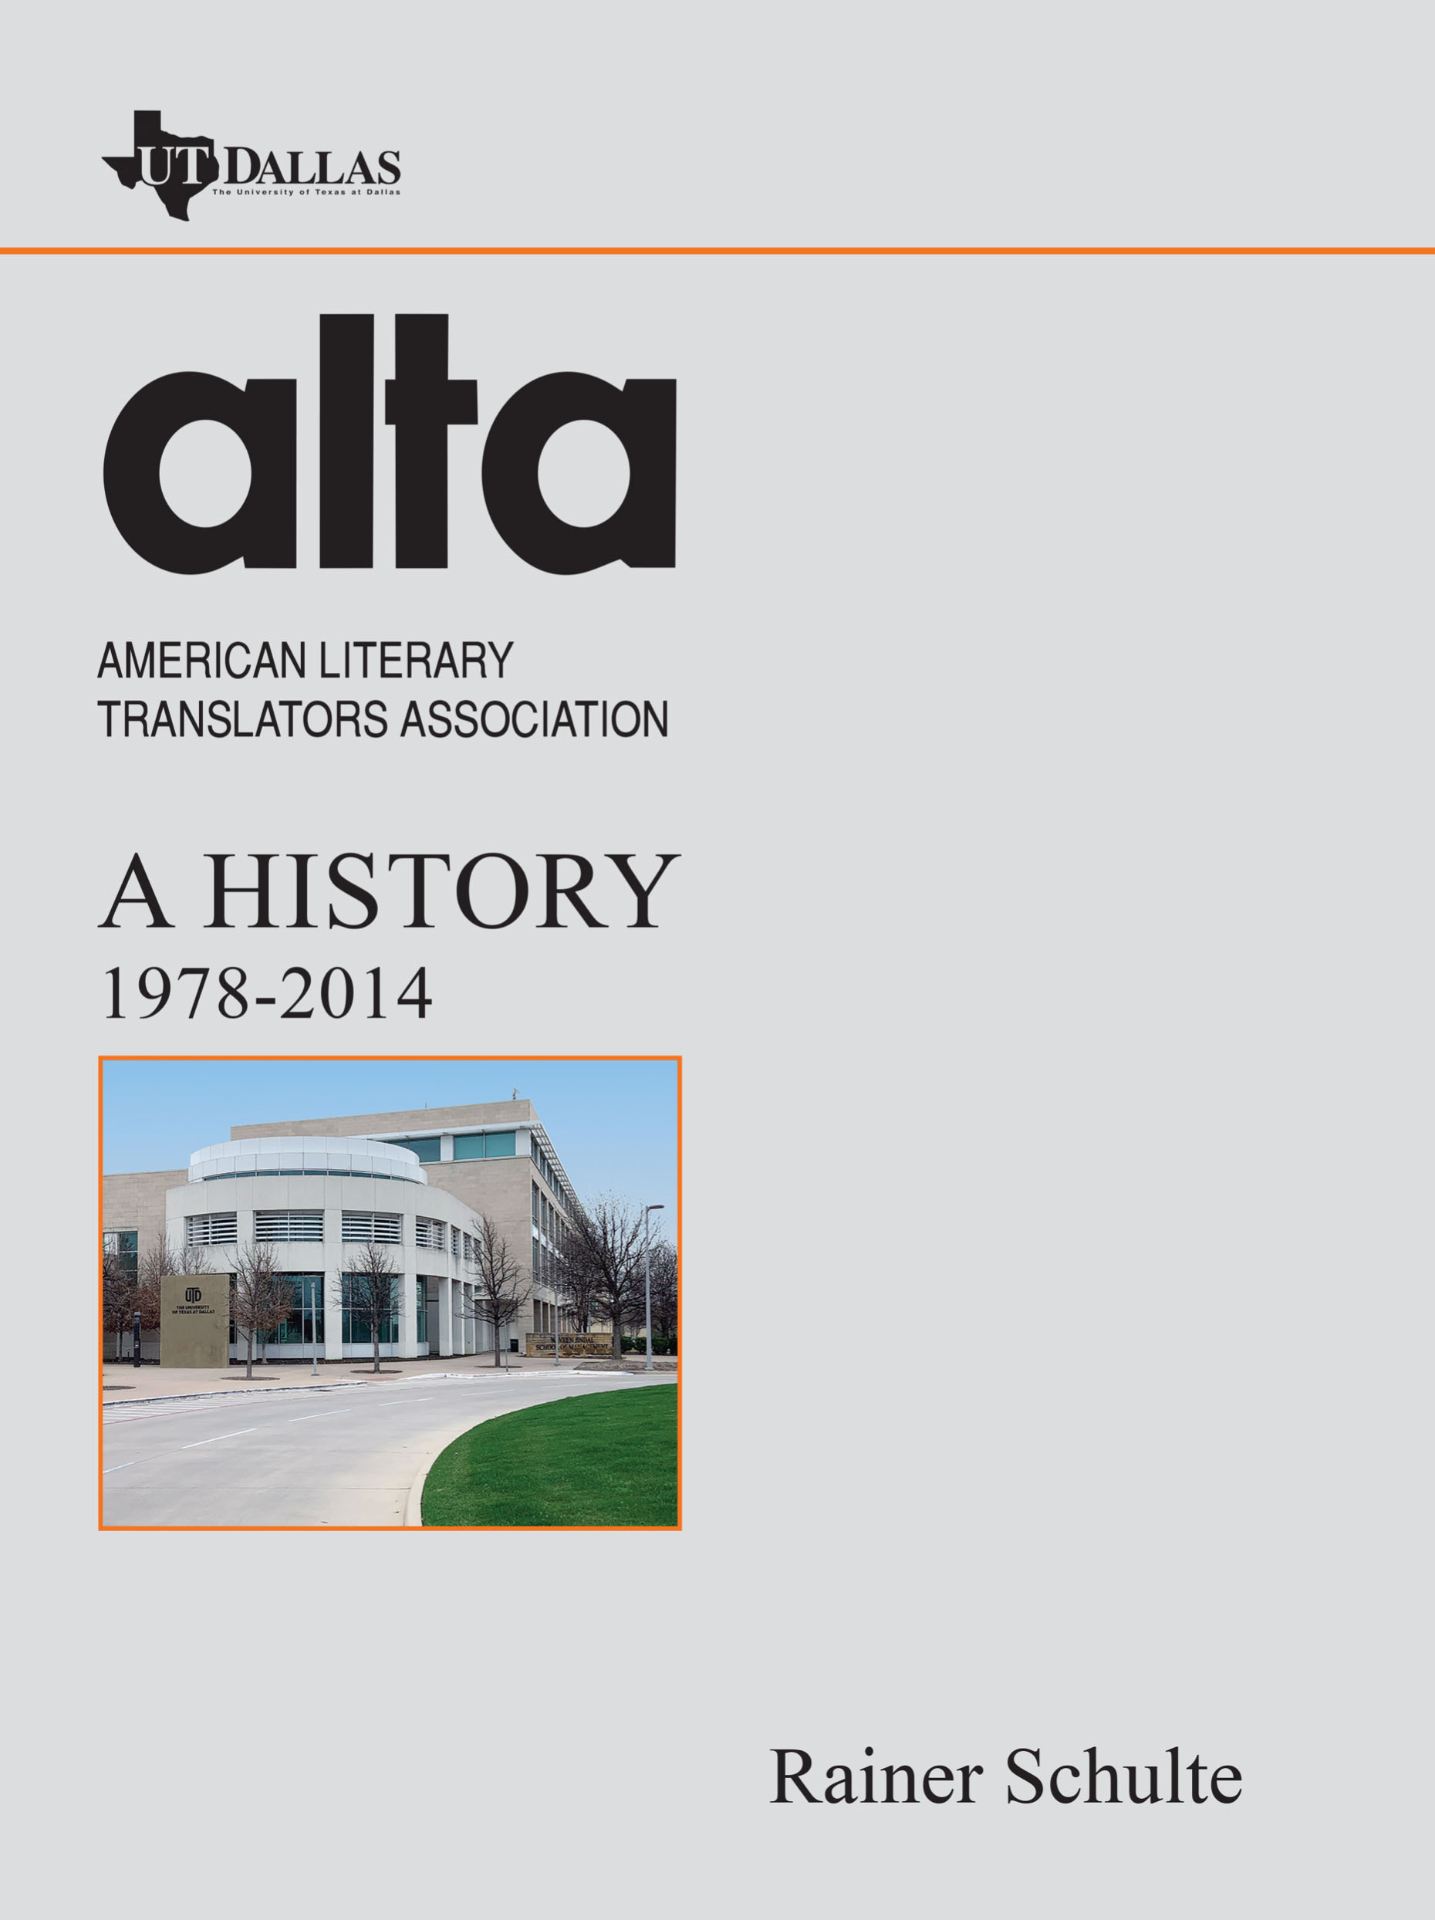 Cover of the book, "American Literary Translators Association: A History" by Rainer Schulte.